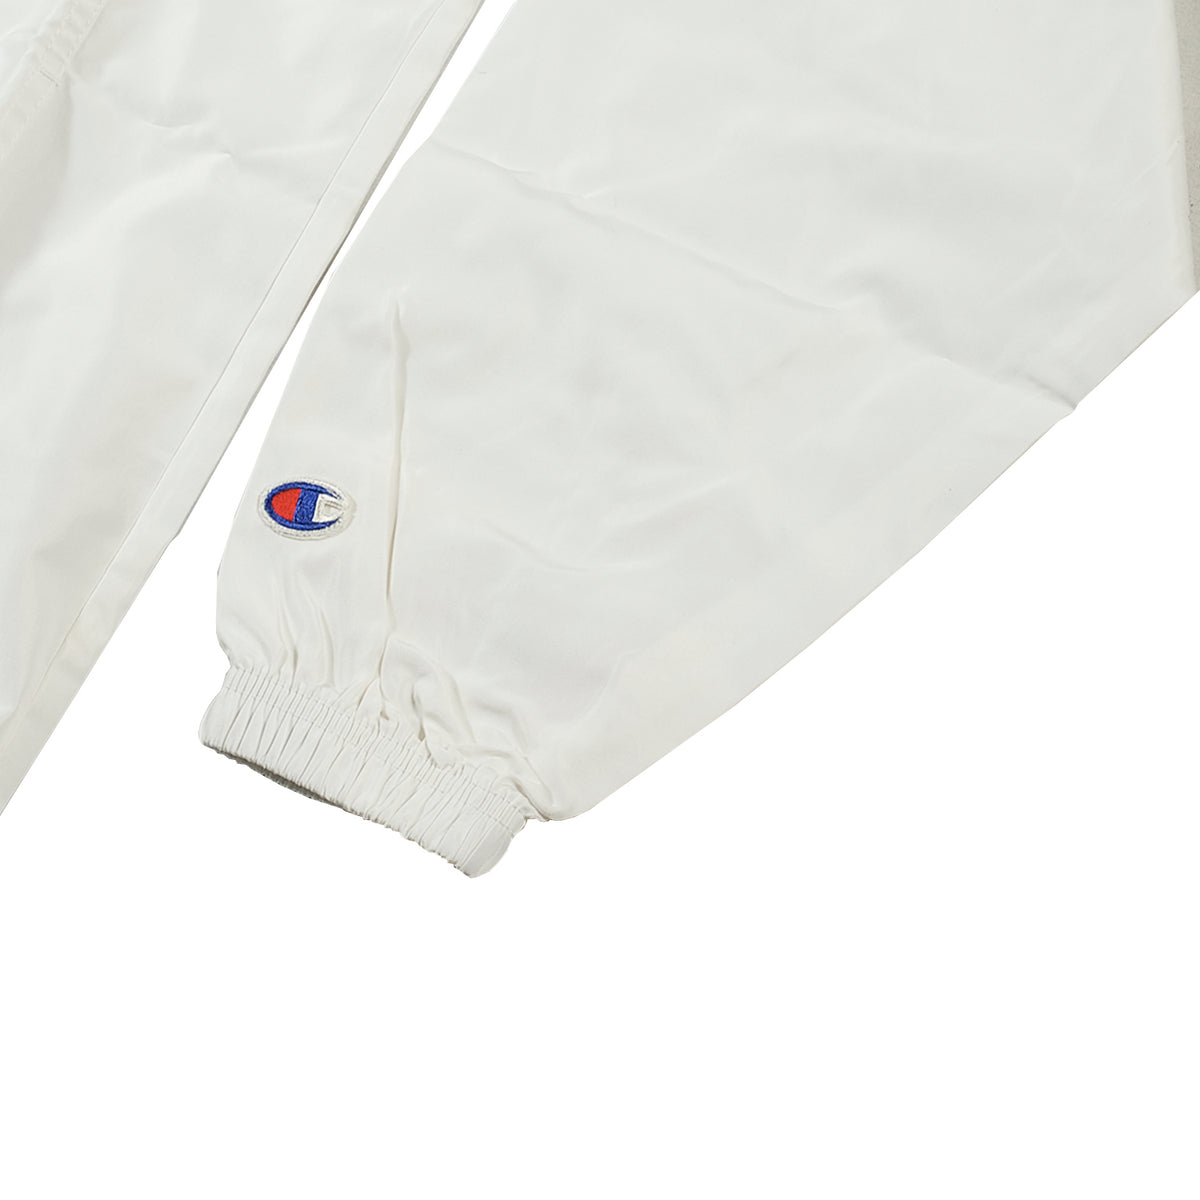 champion packable jacket white